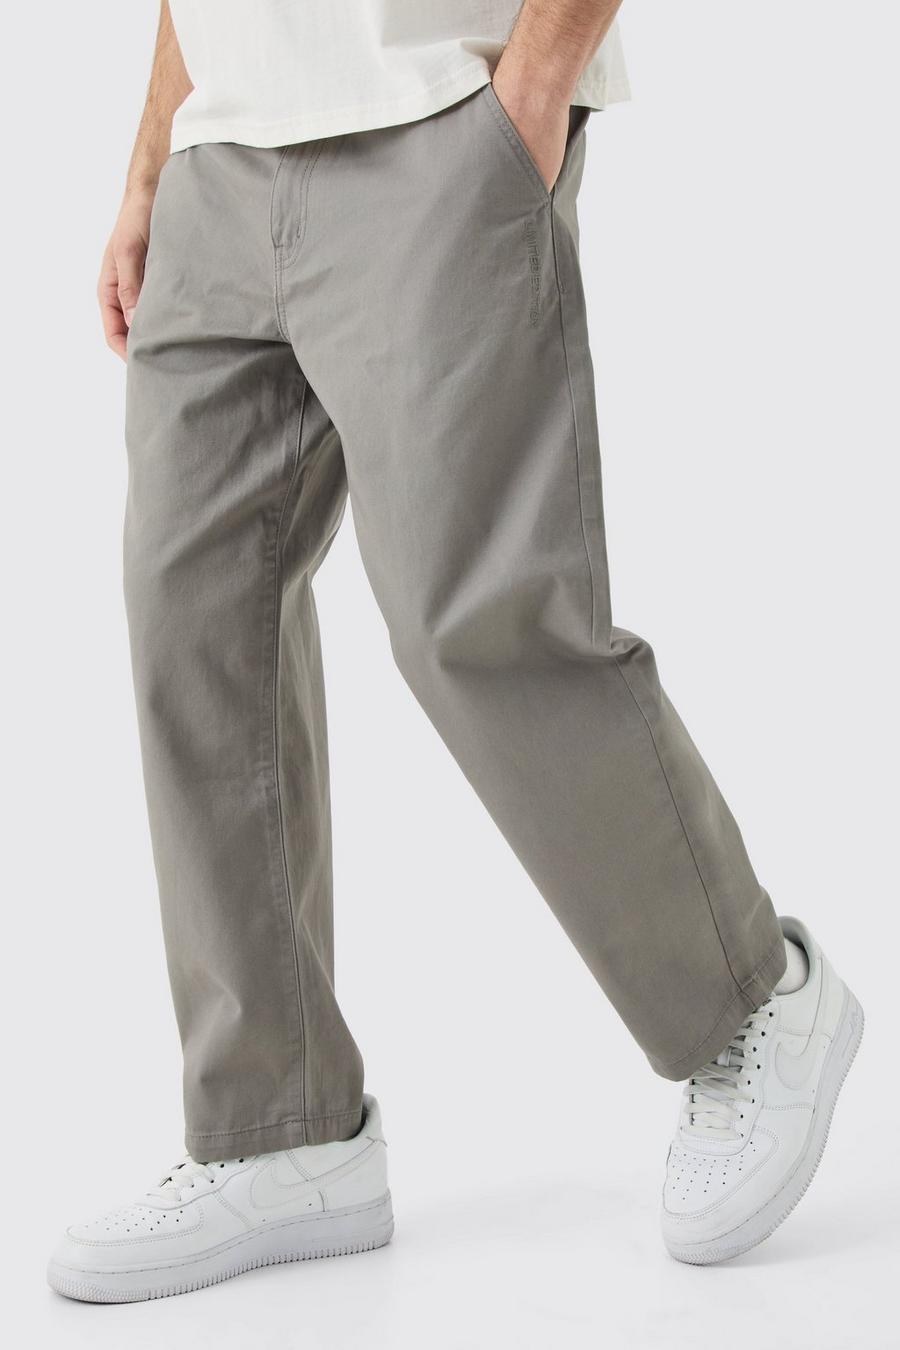 Men's Cropped Trousers, Skinny & Slim Fit Cropped Trousers